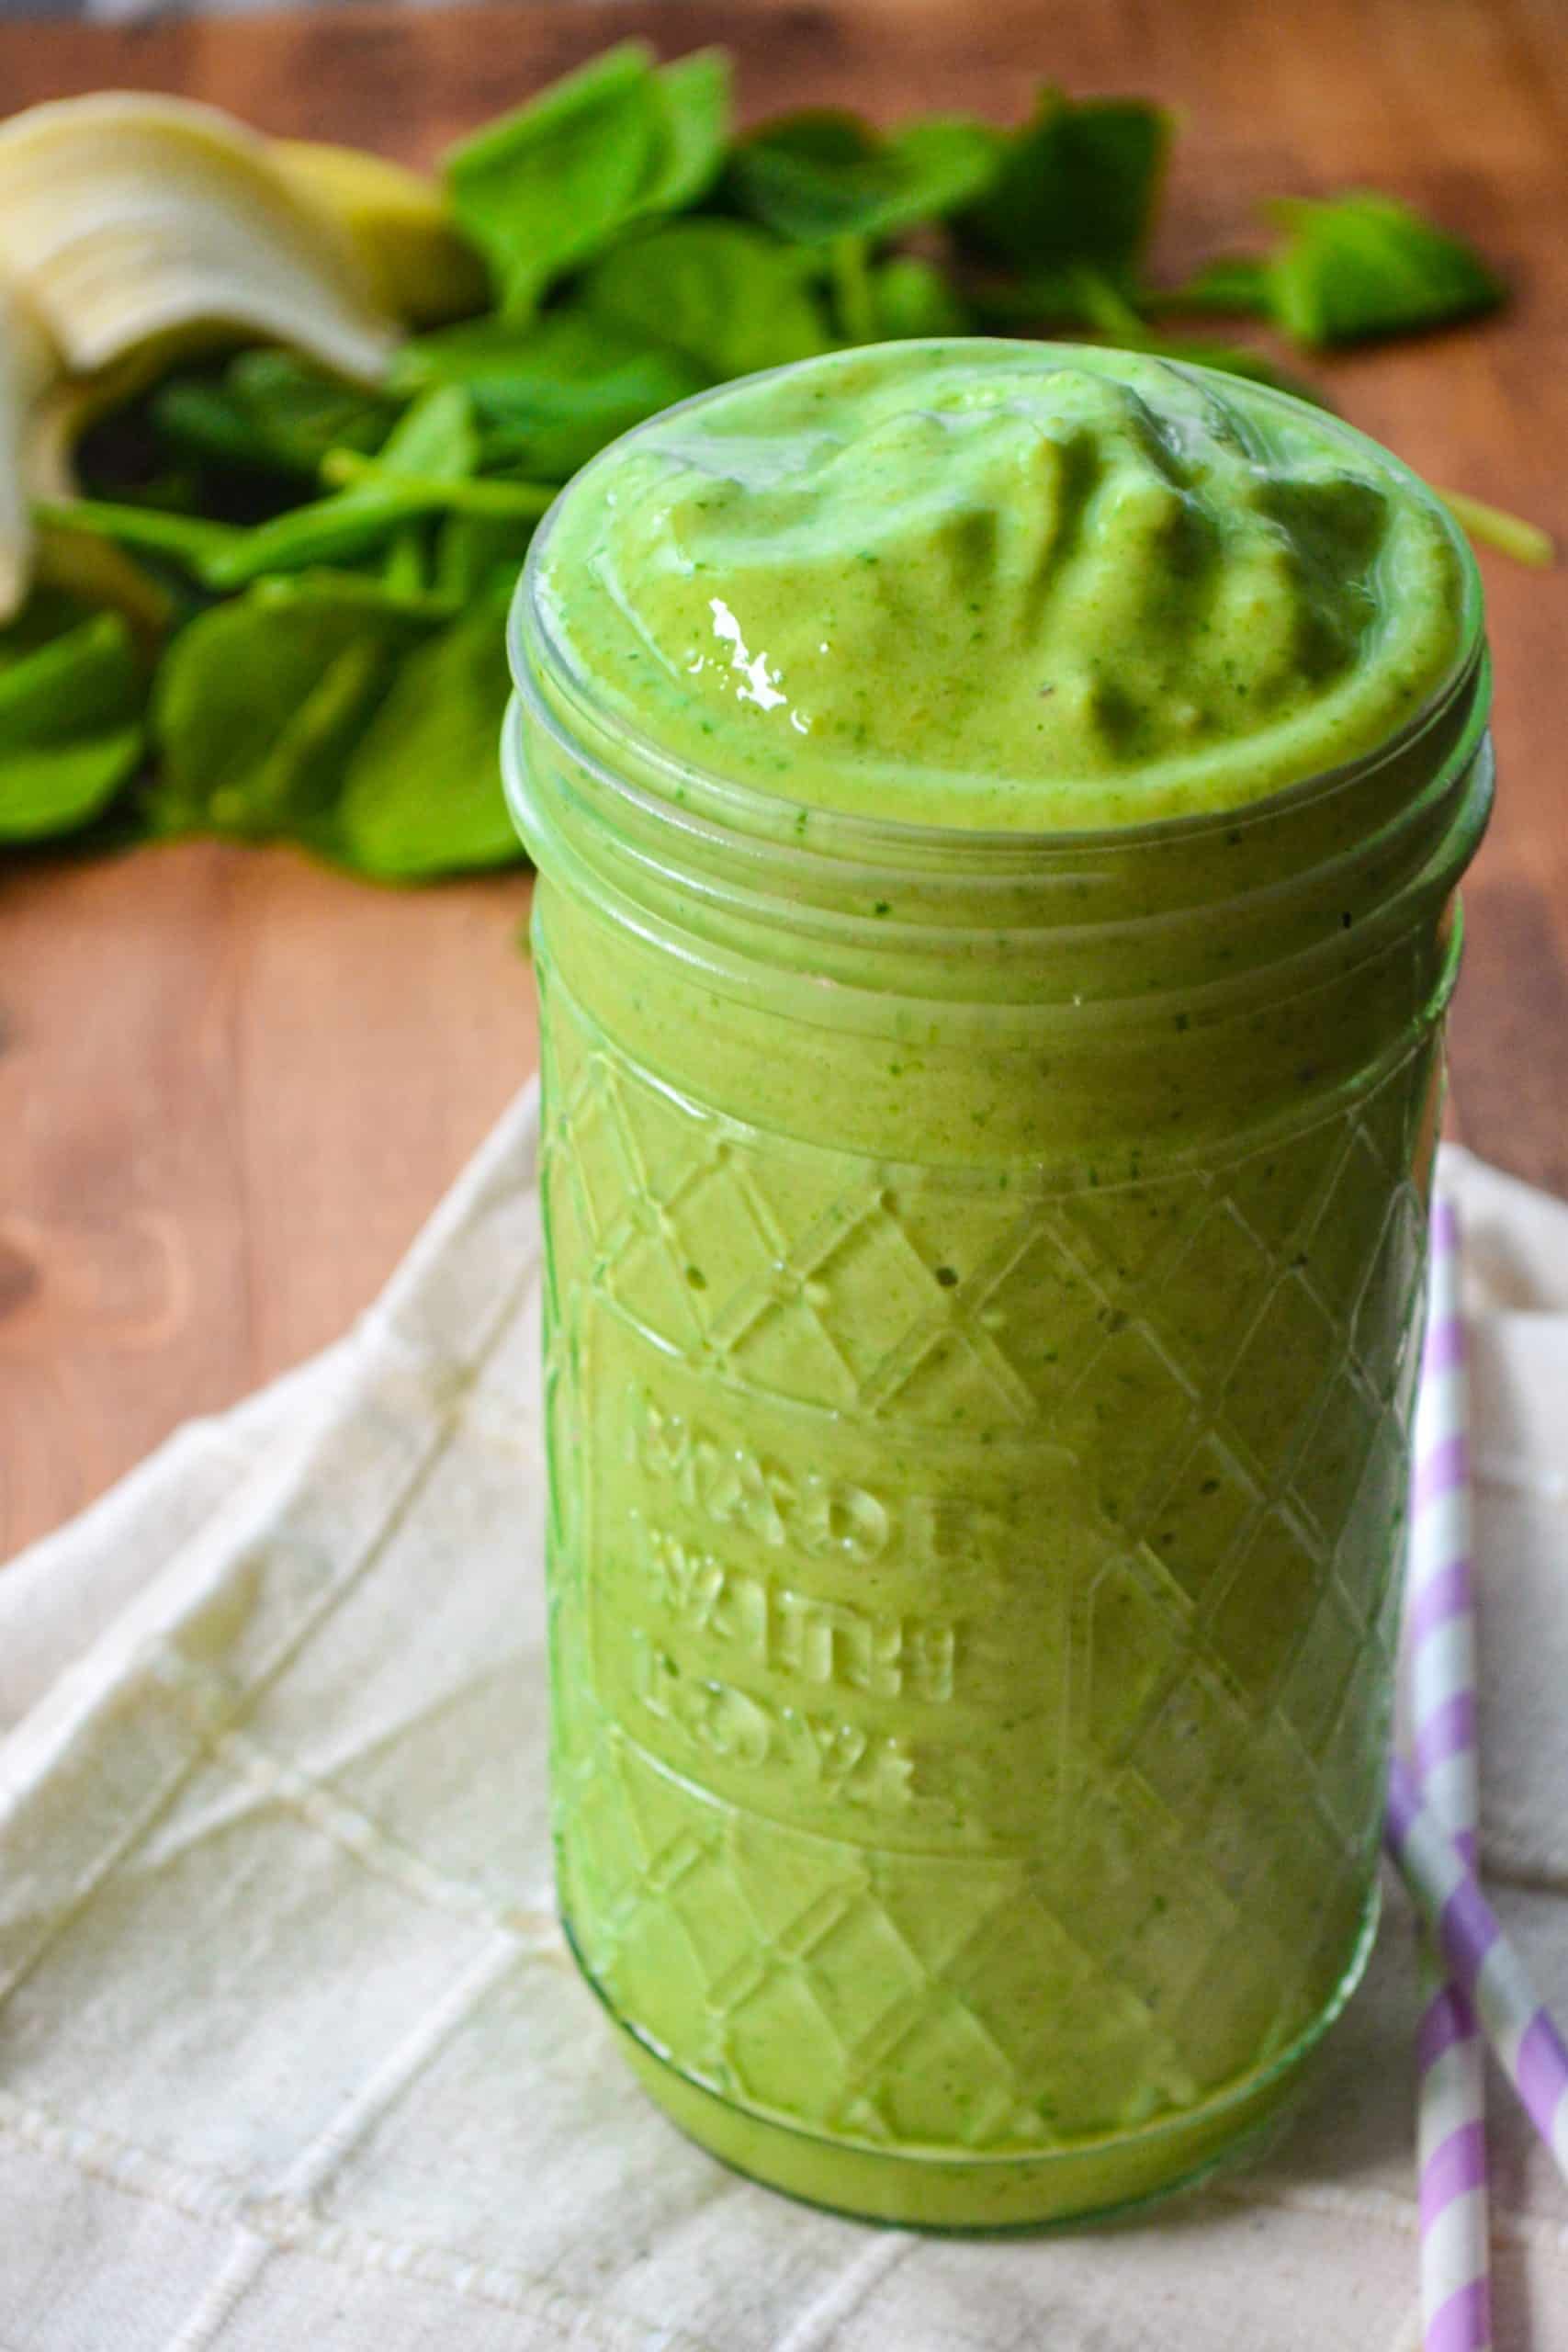 A large glass jar of green smoothie, with a purple straw for drinking.